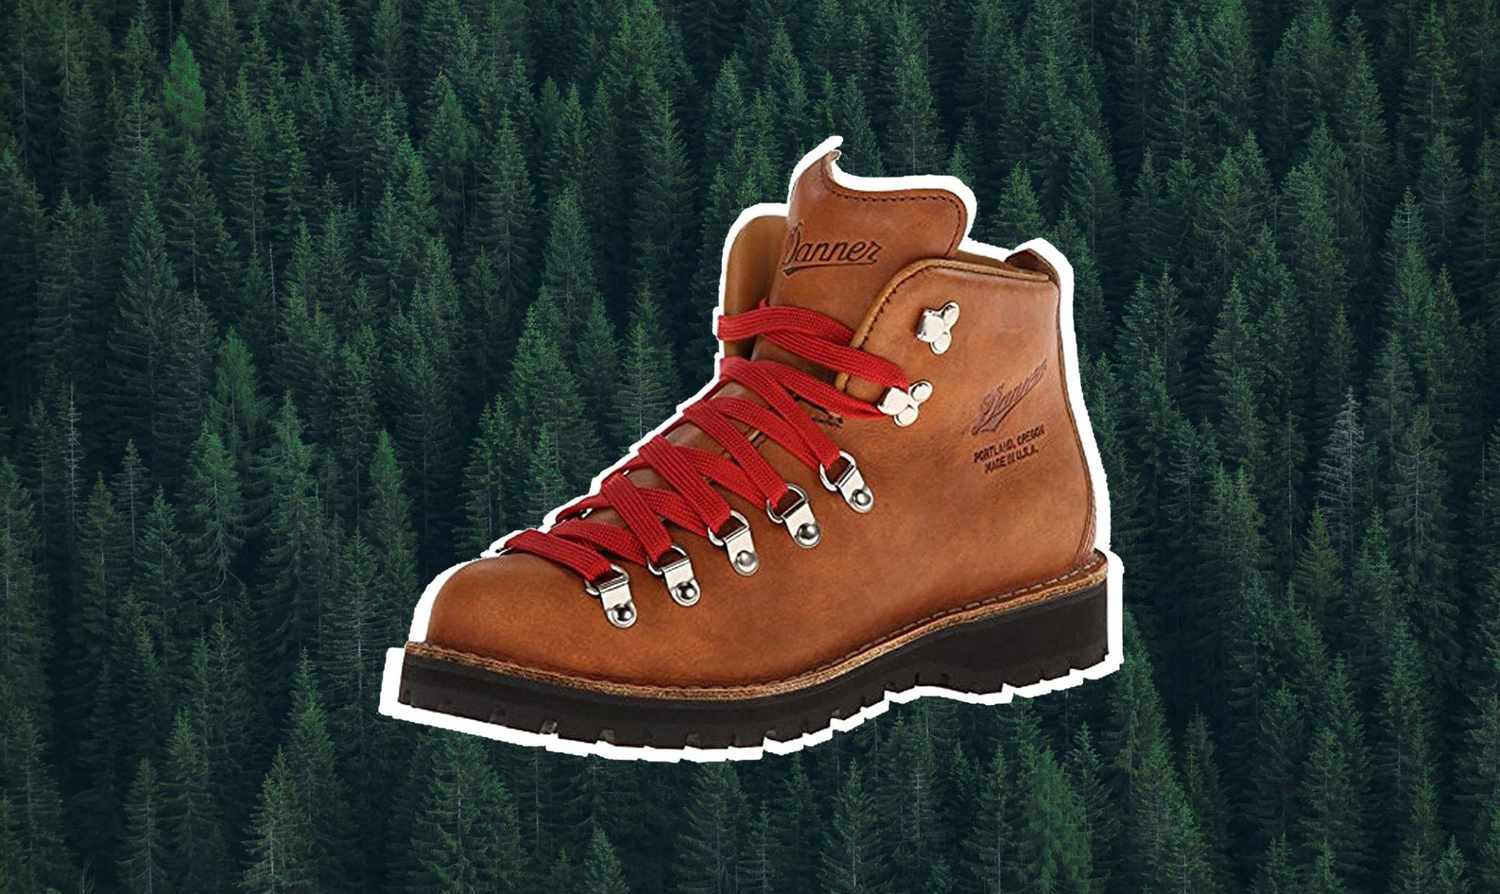 famous hiking boots